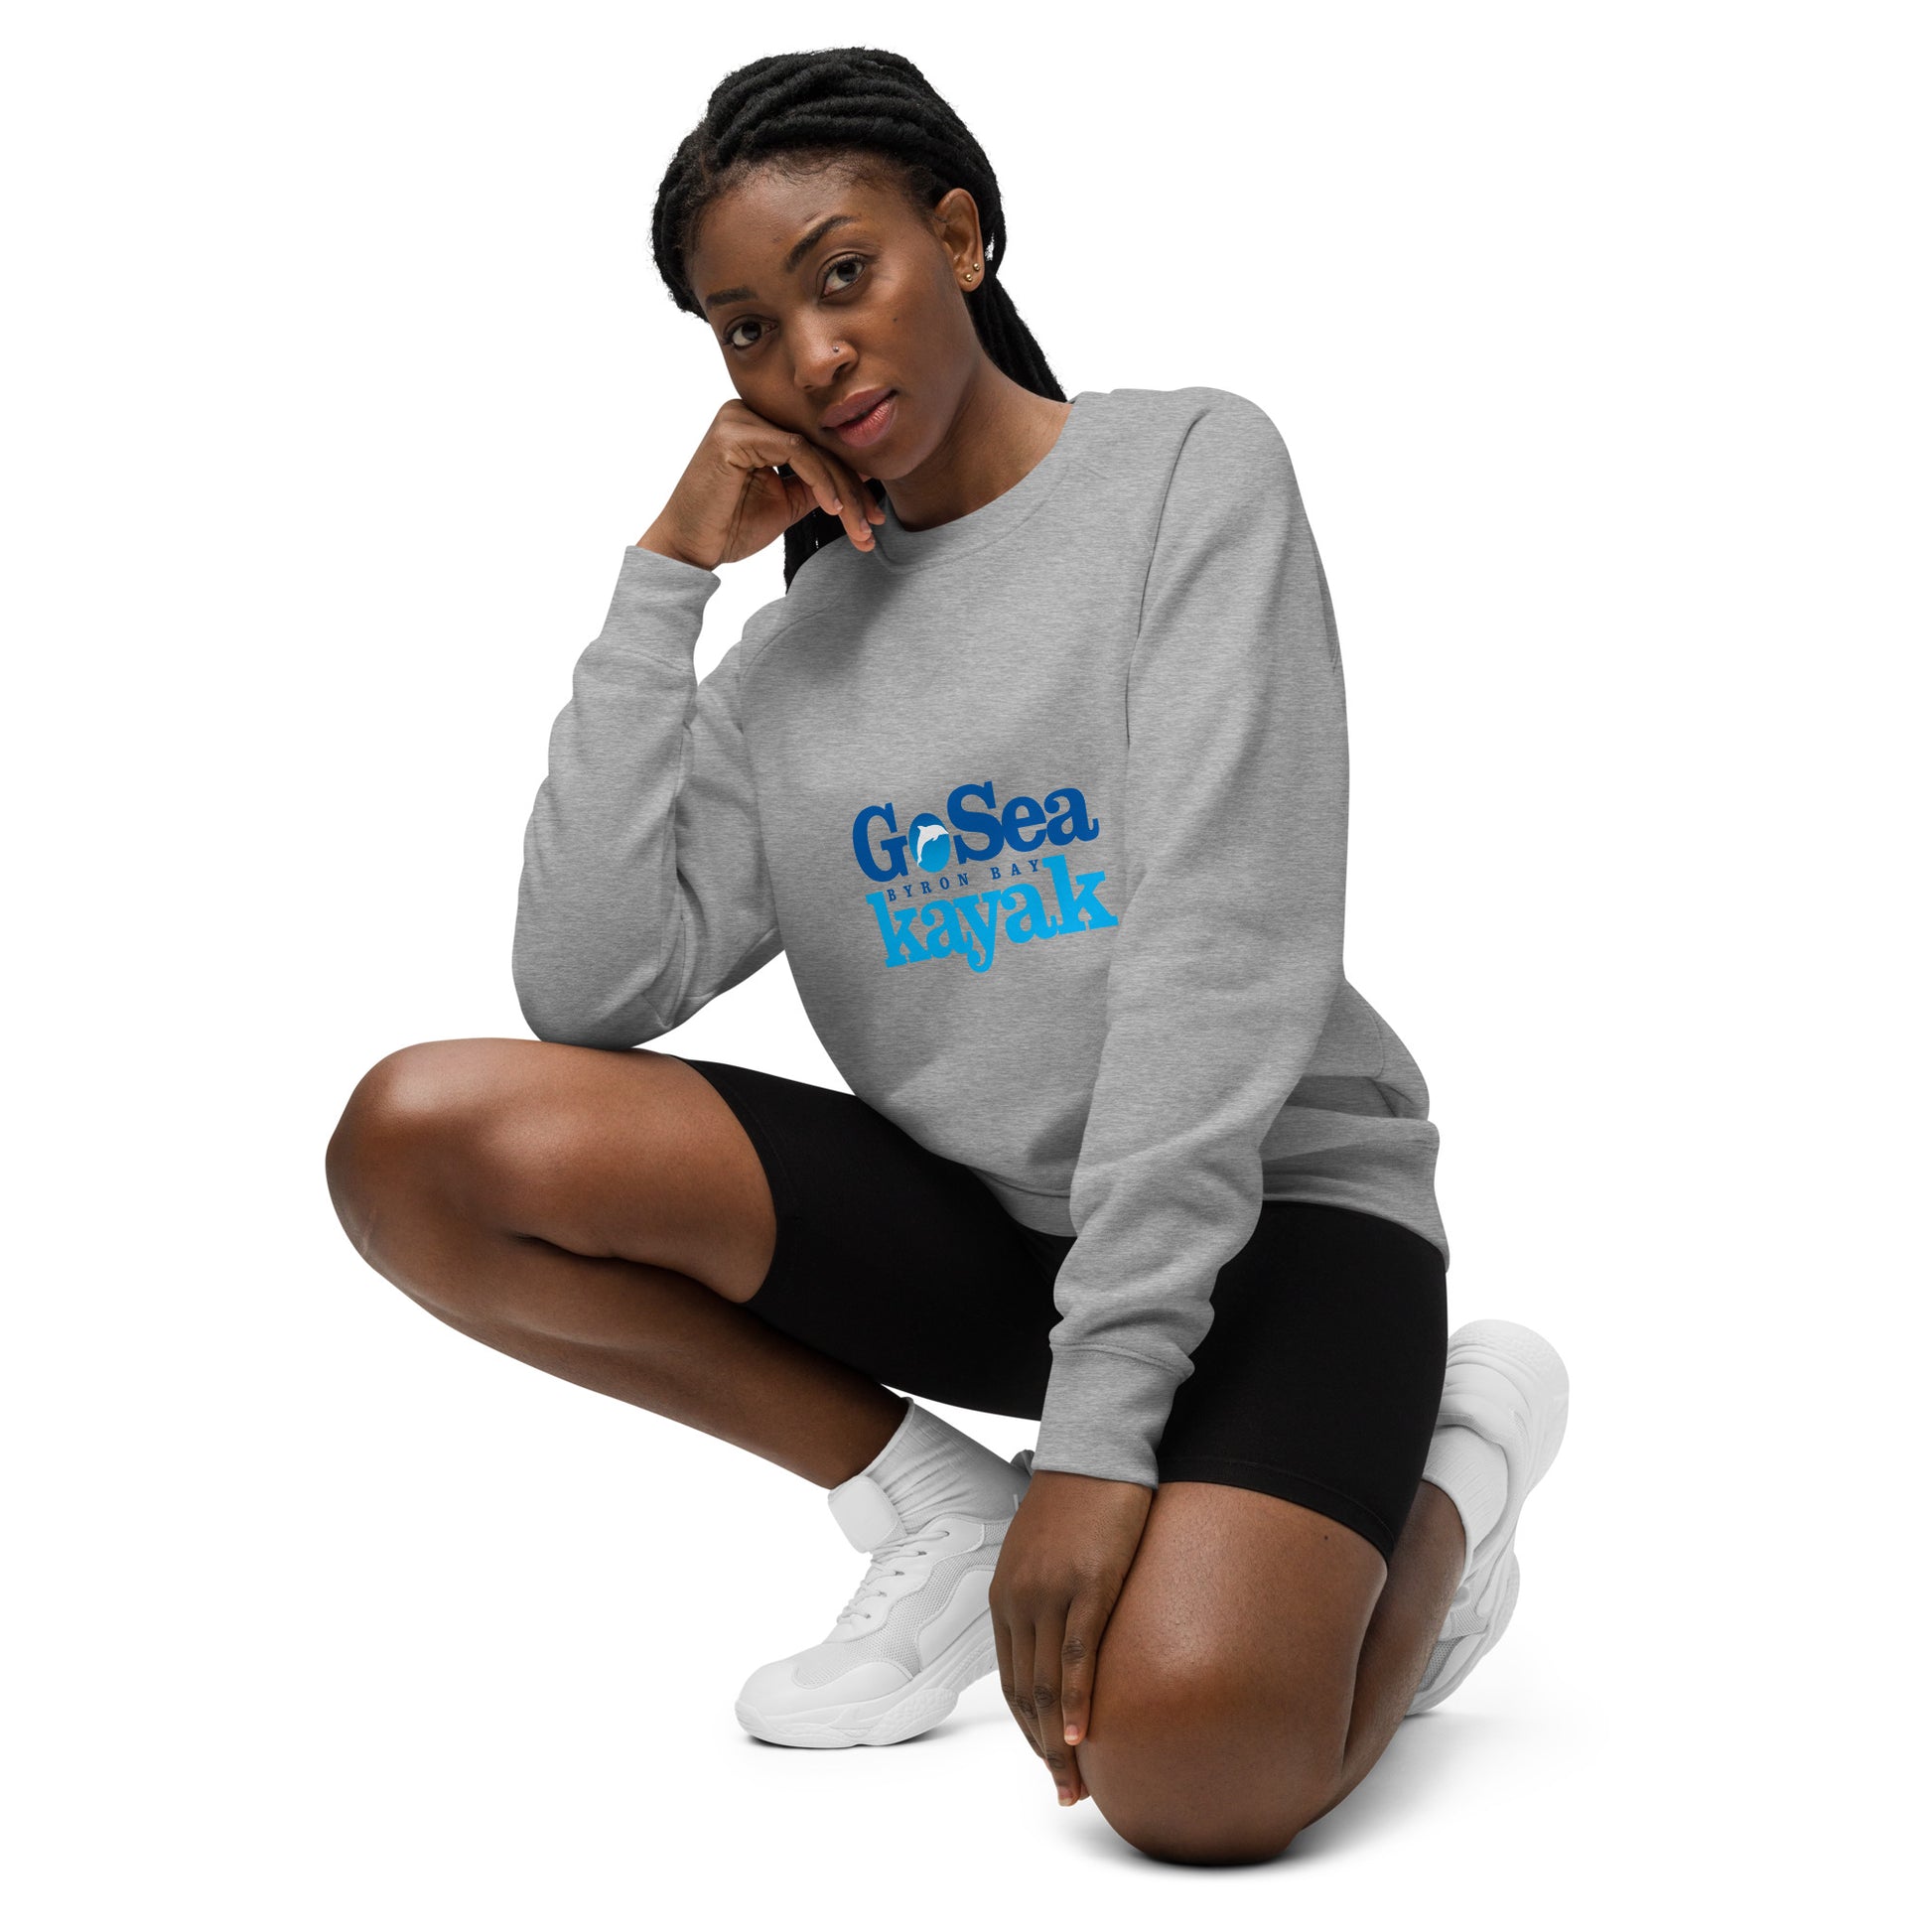  Unisex Sweatshirt - Grey Marle - Front view, being warn by woman crouching down with one knee up - Go Sea Kayak Byron Bay logo on front - Genuine Byron Bay Merchandise | Produced by Go Sea Kayak Byron Bay 